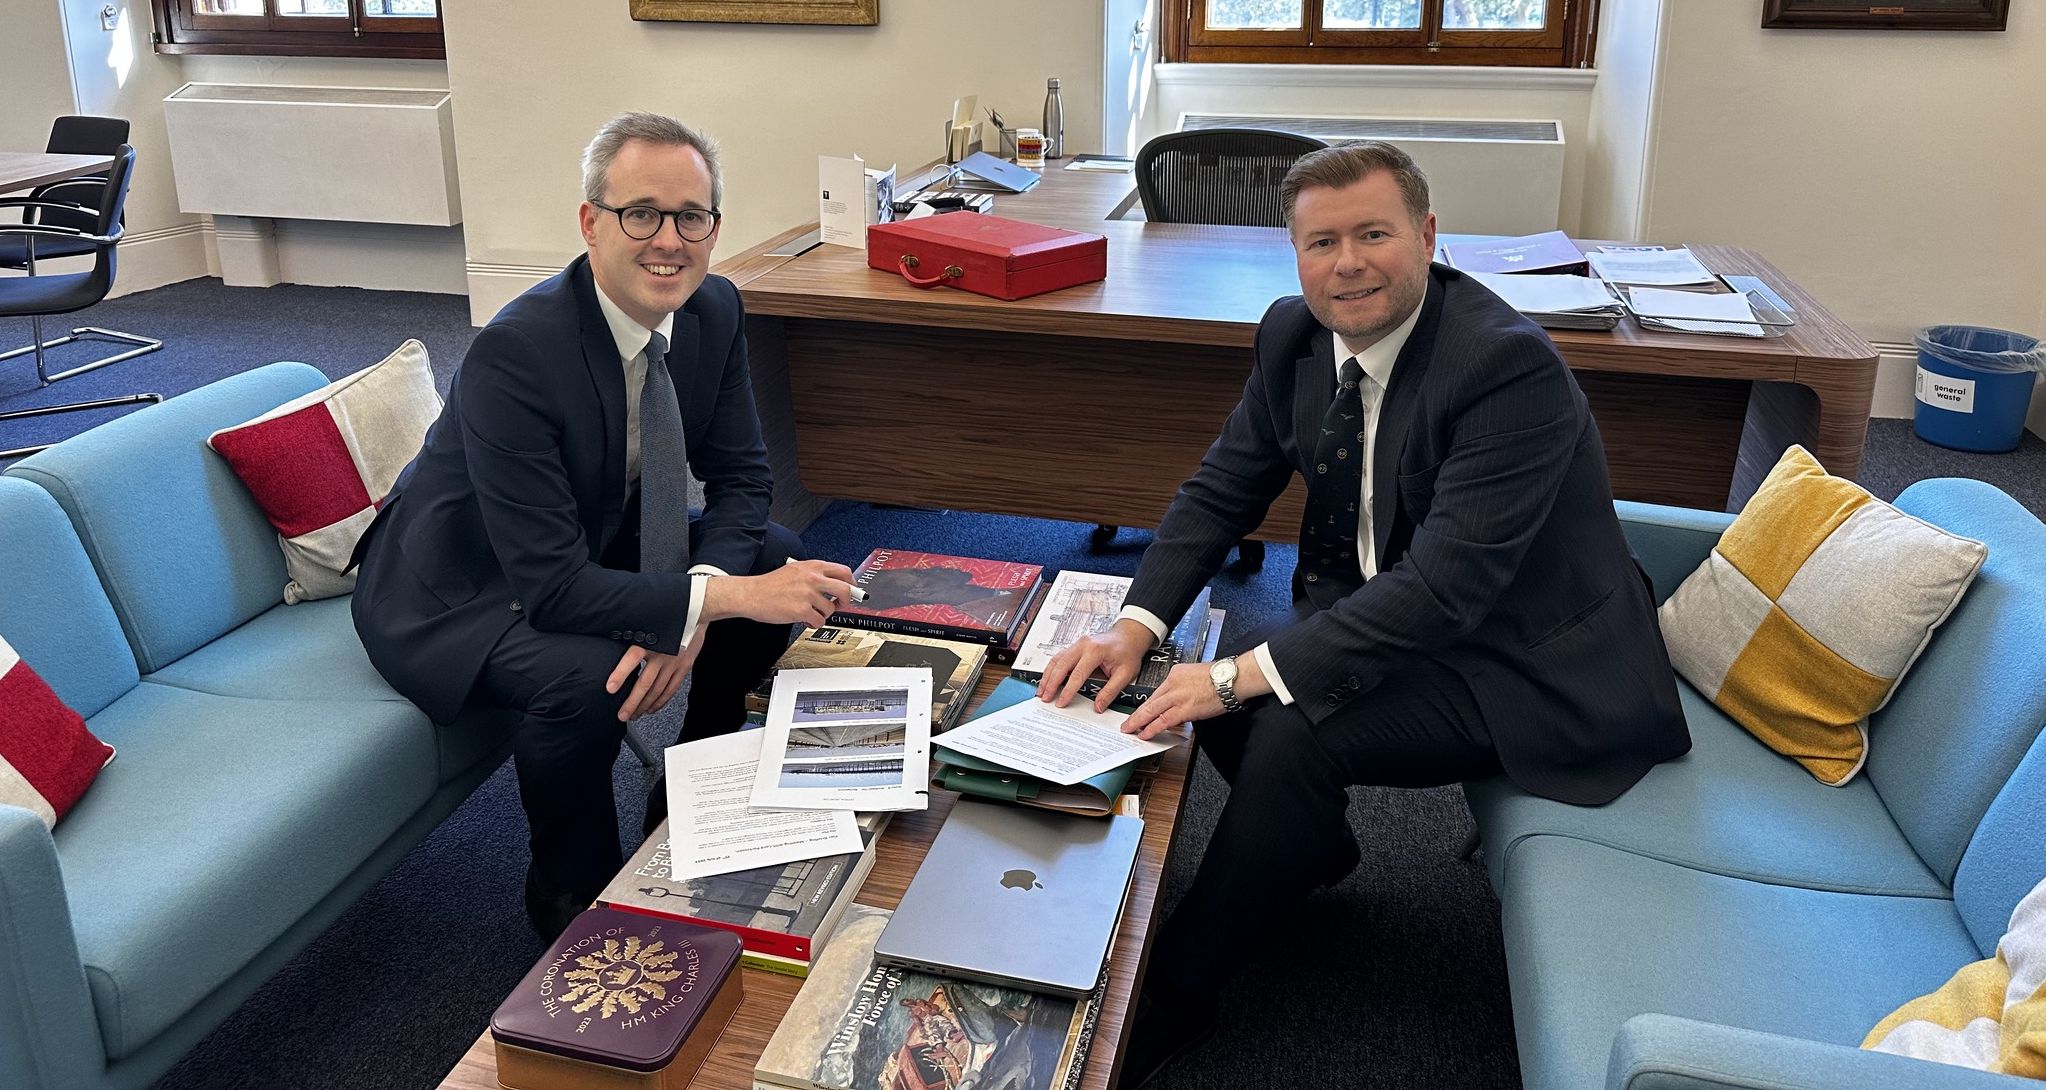 Southport MP Damien Kopore (right) met with Lord Parkinson of Whitley Bay, as part of ongoing work to highlight the need for increased funding for Southport Pier